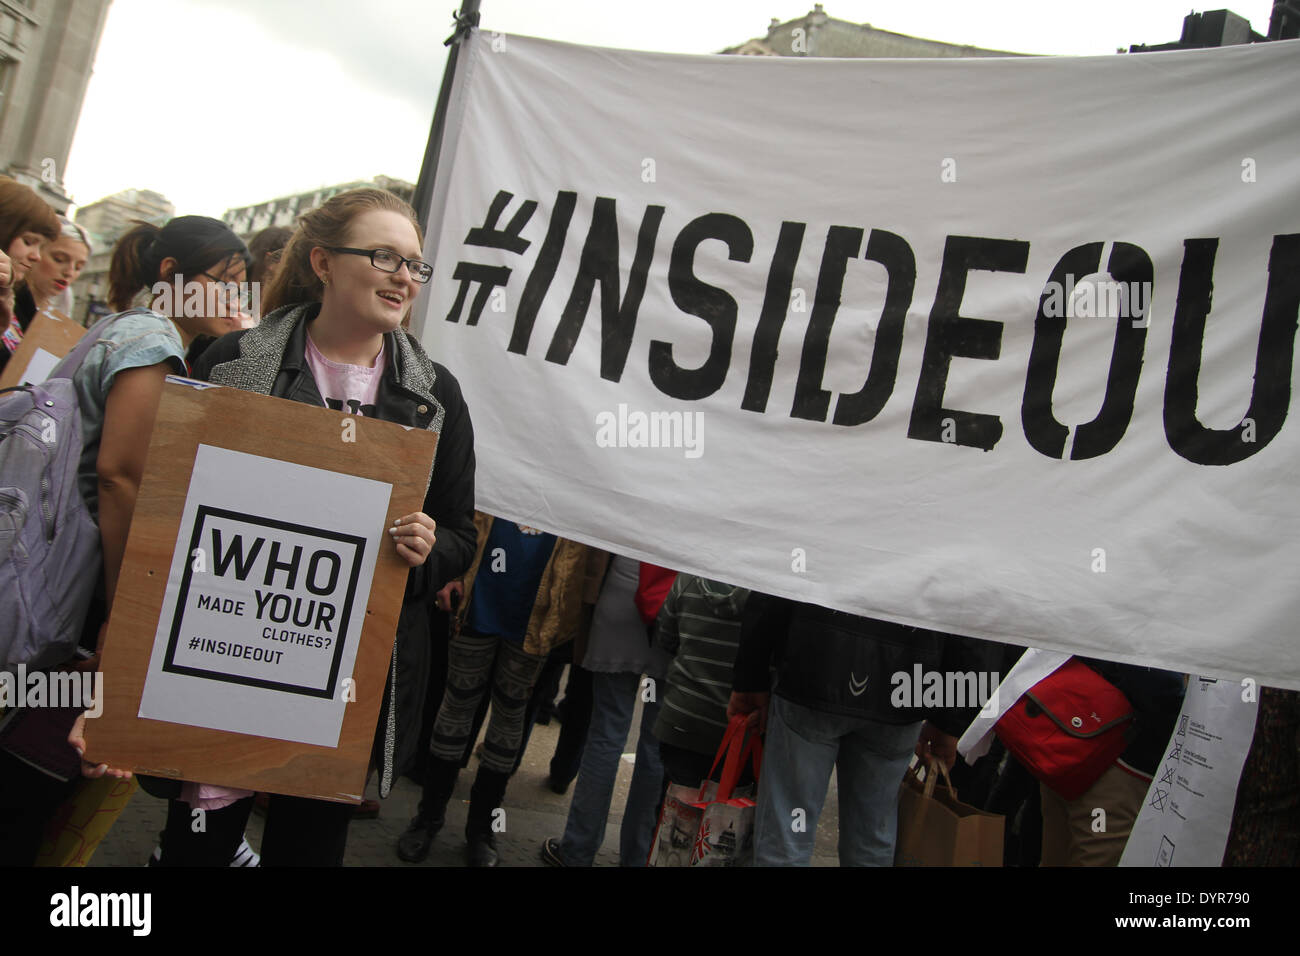 London, UK. 24th April 2014. A group of protesters carrying a banner with the words 'Inside Out' chant 'Who made your clothes' Credit:  david mbiyu/Alamy Live News Stock Photo